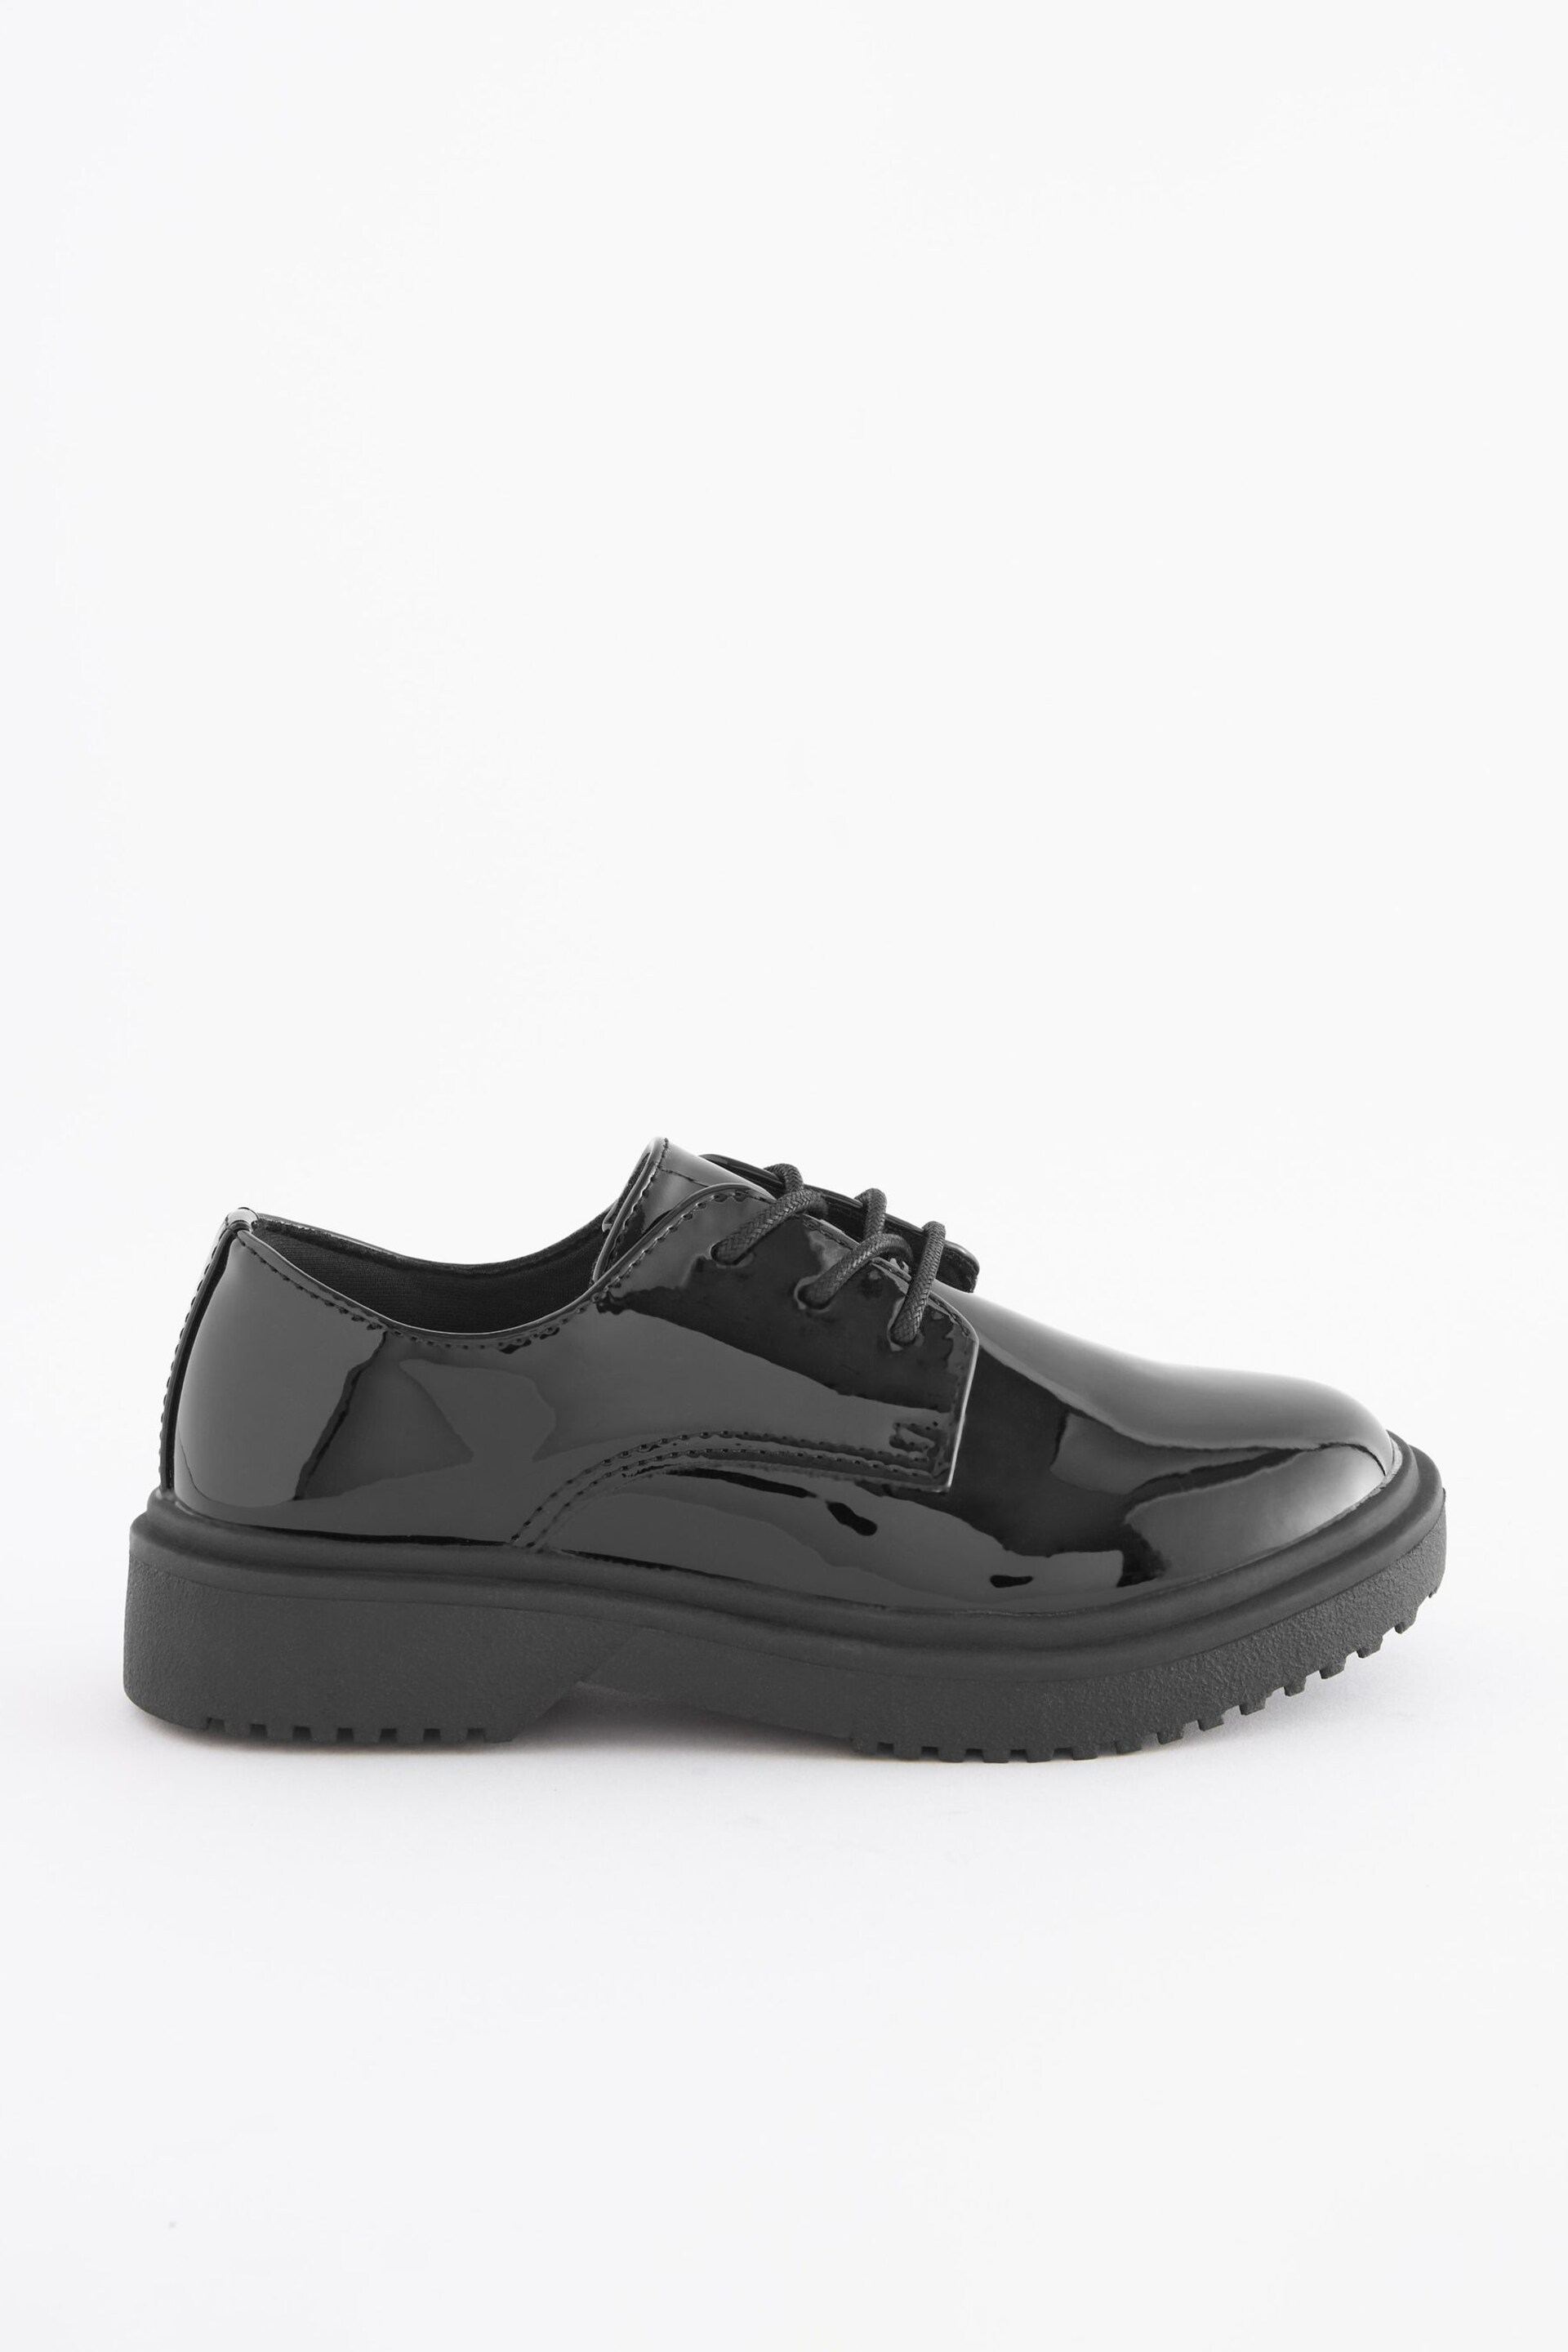 Black Patent Narrow Fit (E) School Chunky Lace-Up Shoes - Image 2 of 5